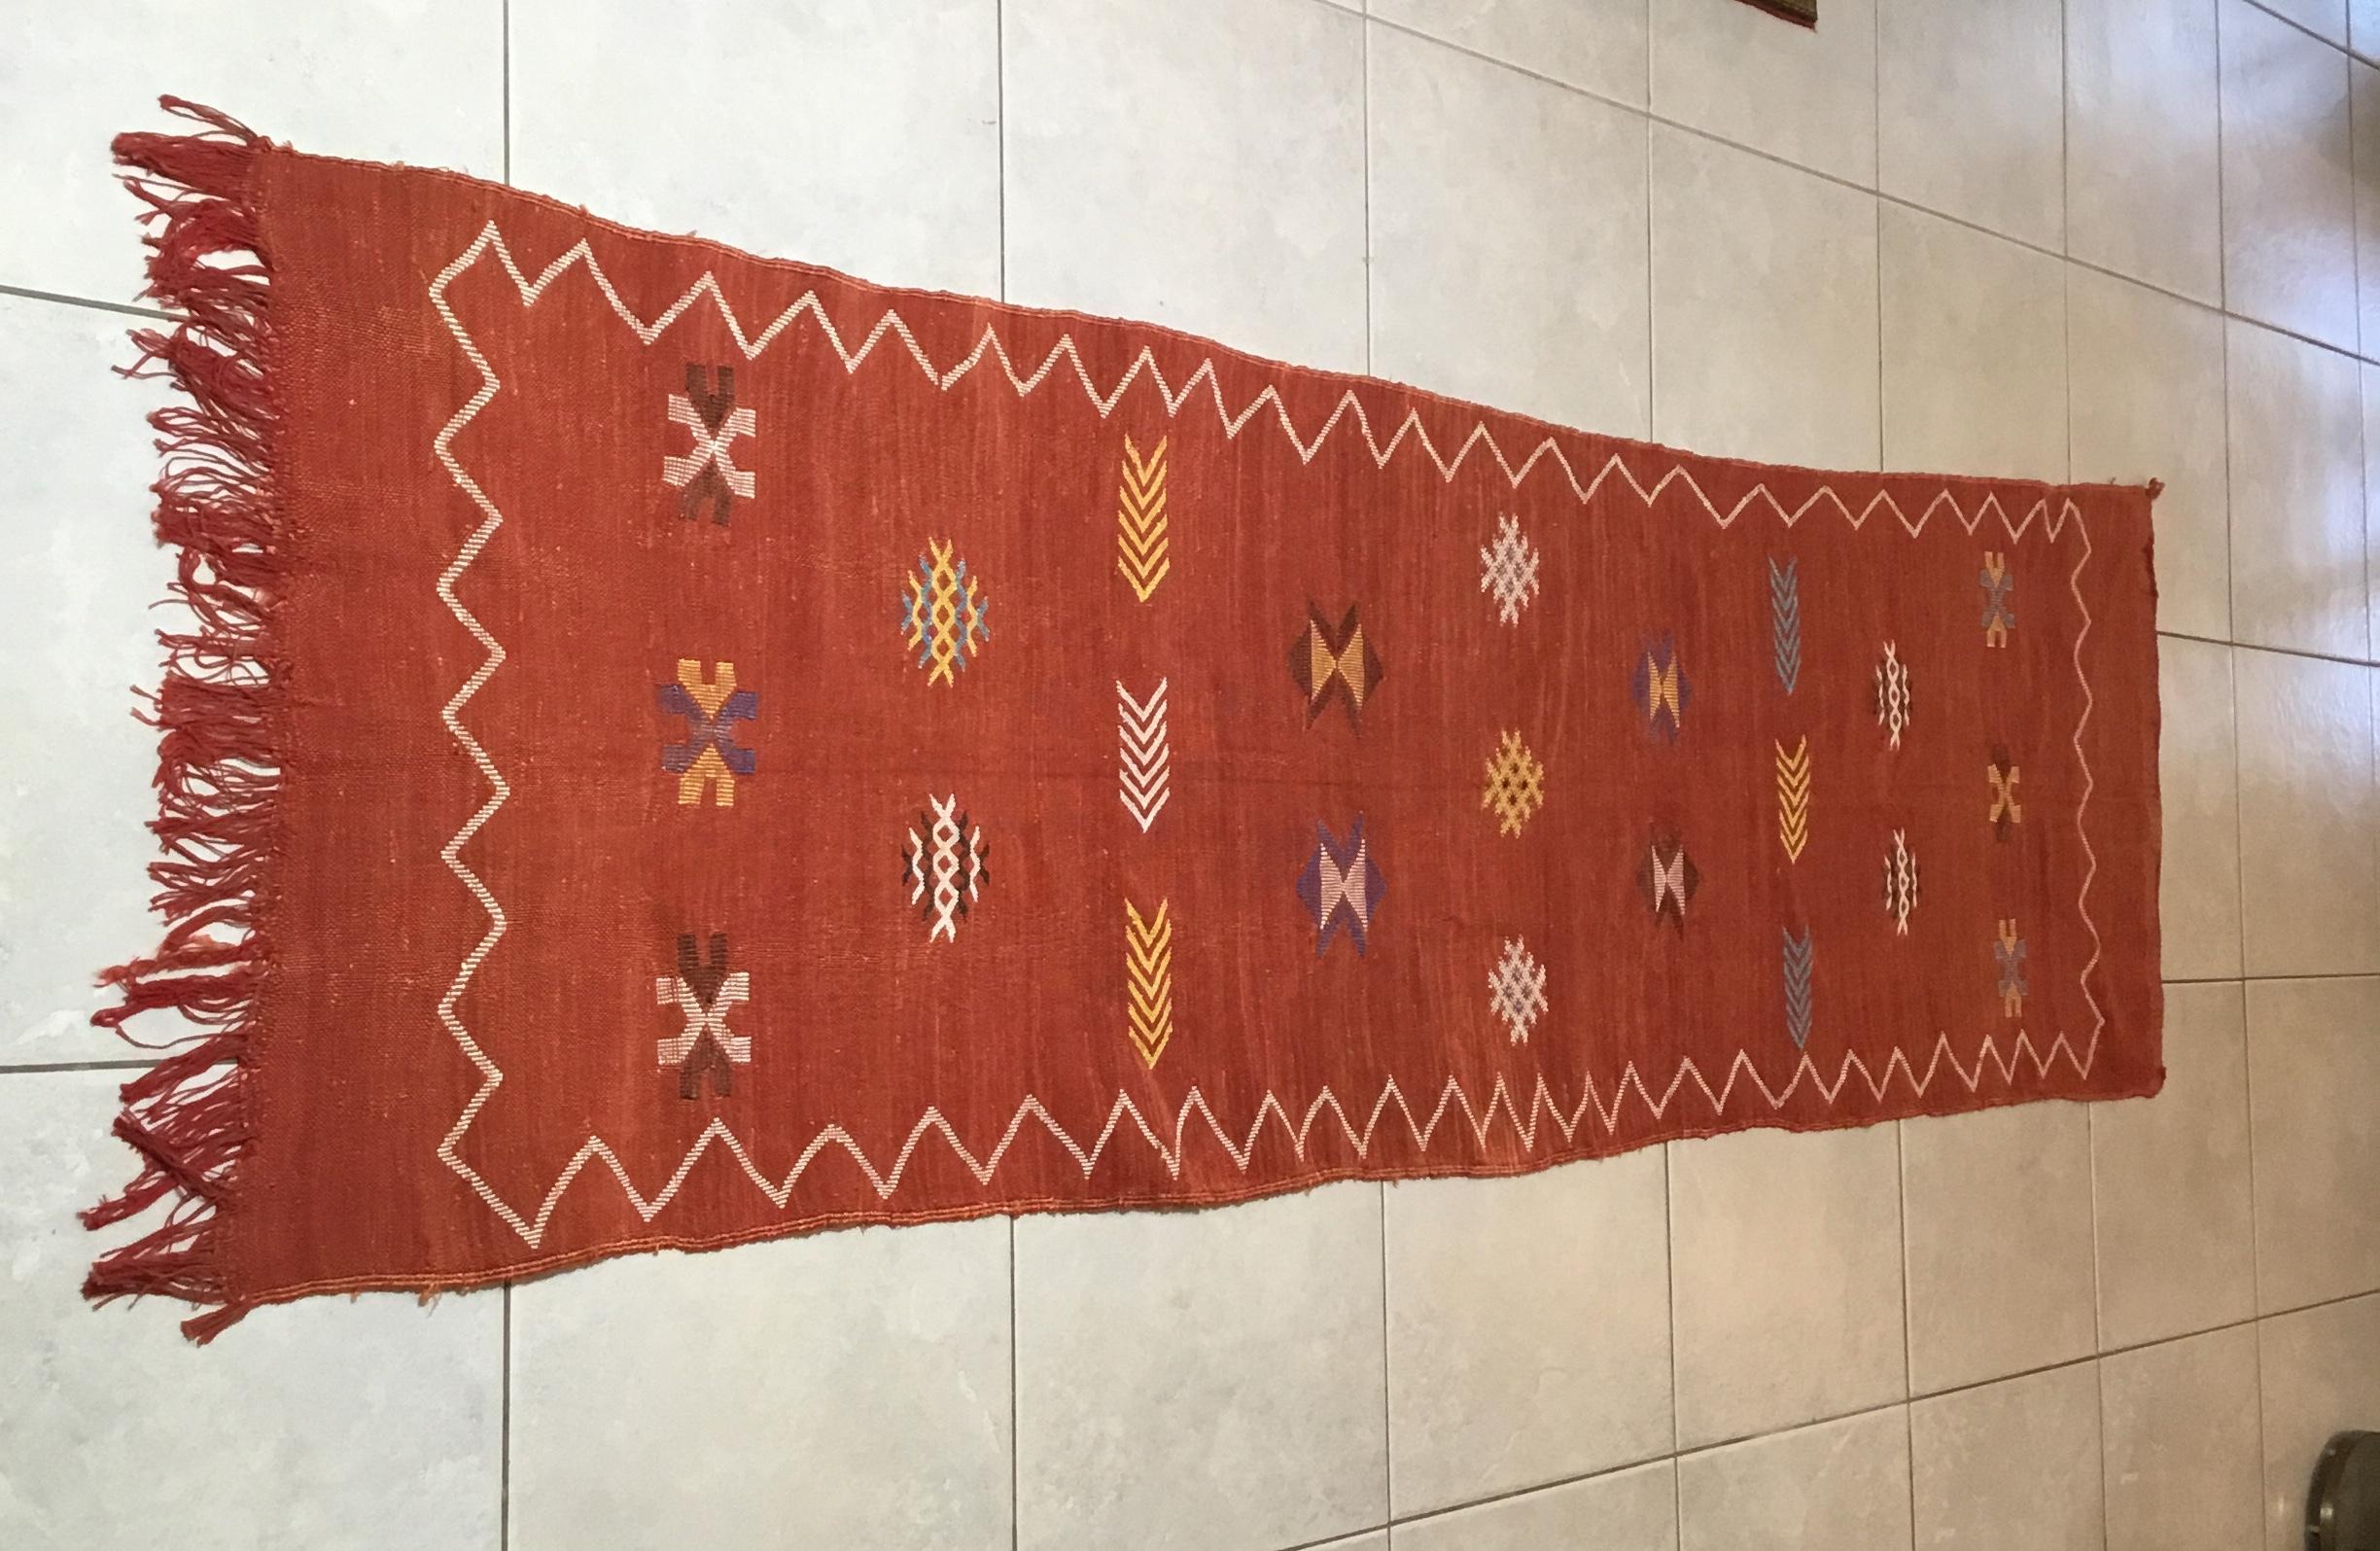 Beautiful handwoven rug made of cactus silk with soft multi-color geometric motifs on a red - salmon color background, nicely feel to touch. Great decorative addition for any room.